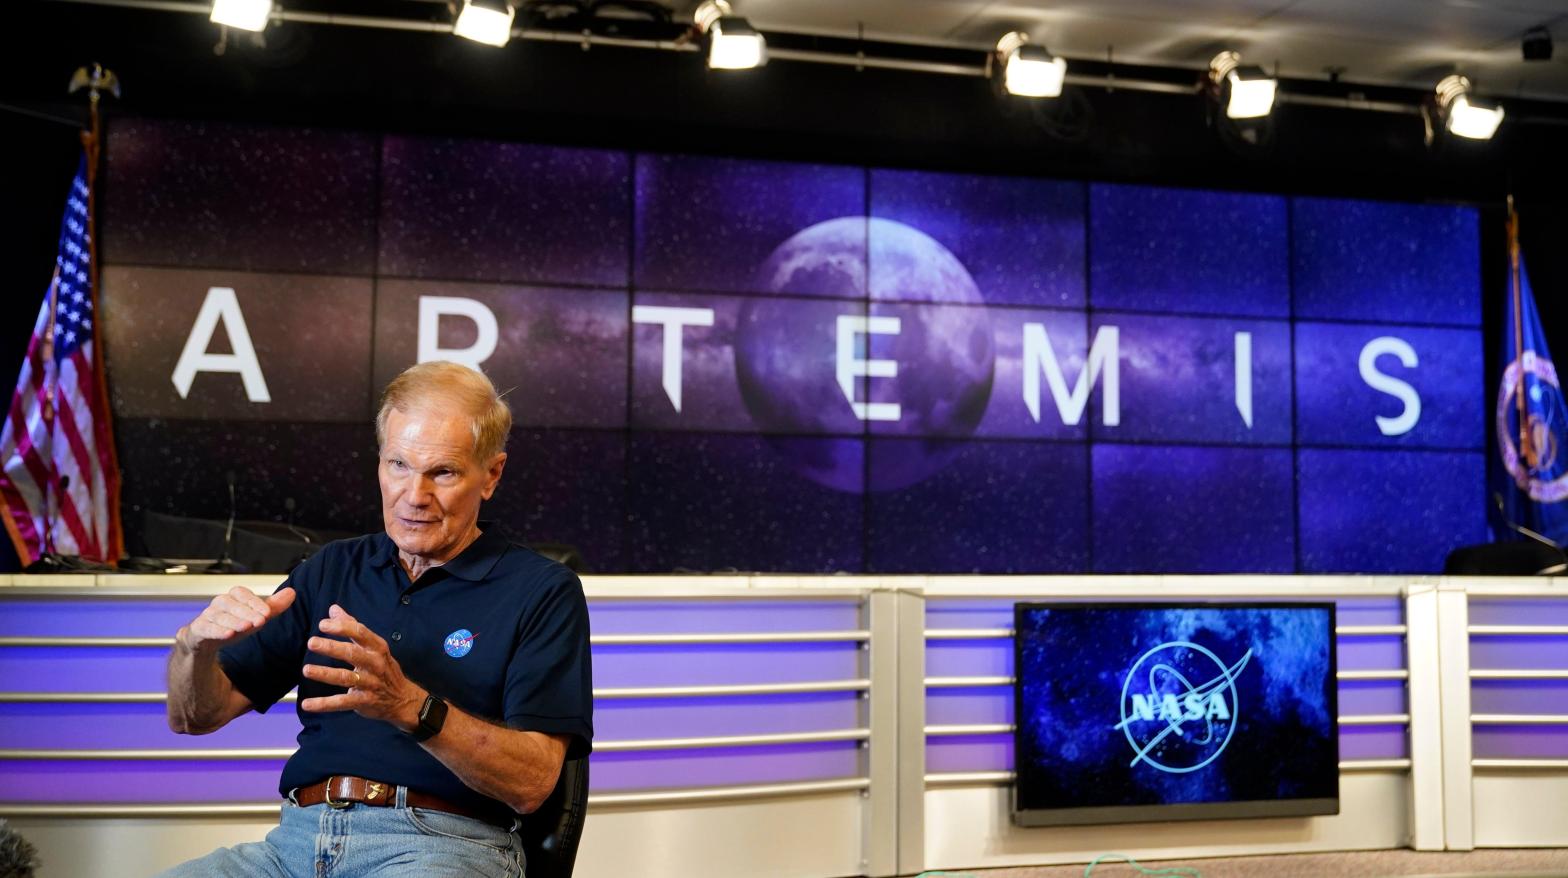 Bill Nelson was sworn in as NASA administrator in May 2021. (Photo: John Raoux, AP)